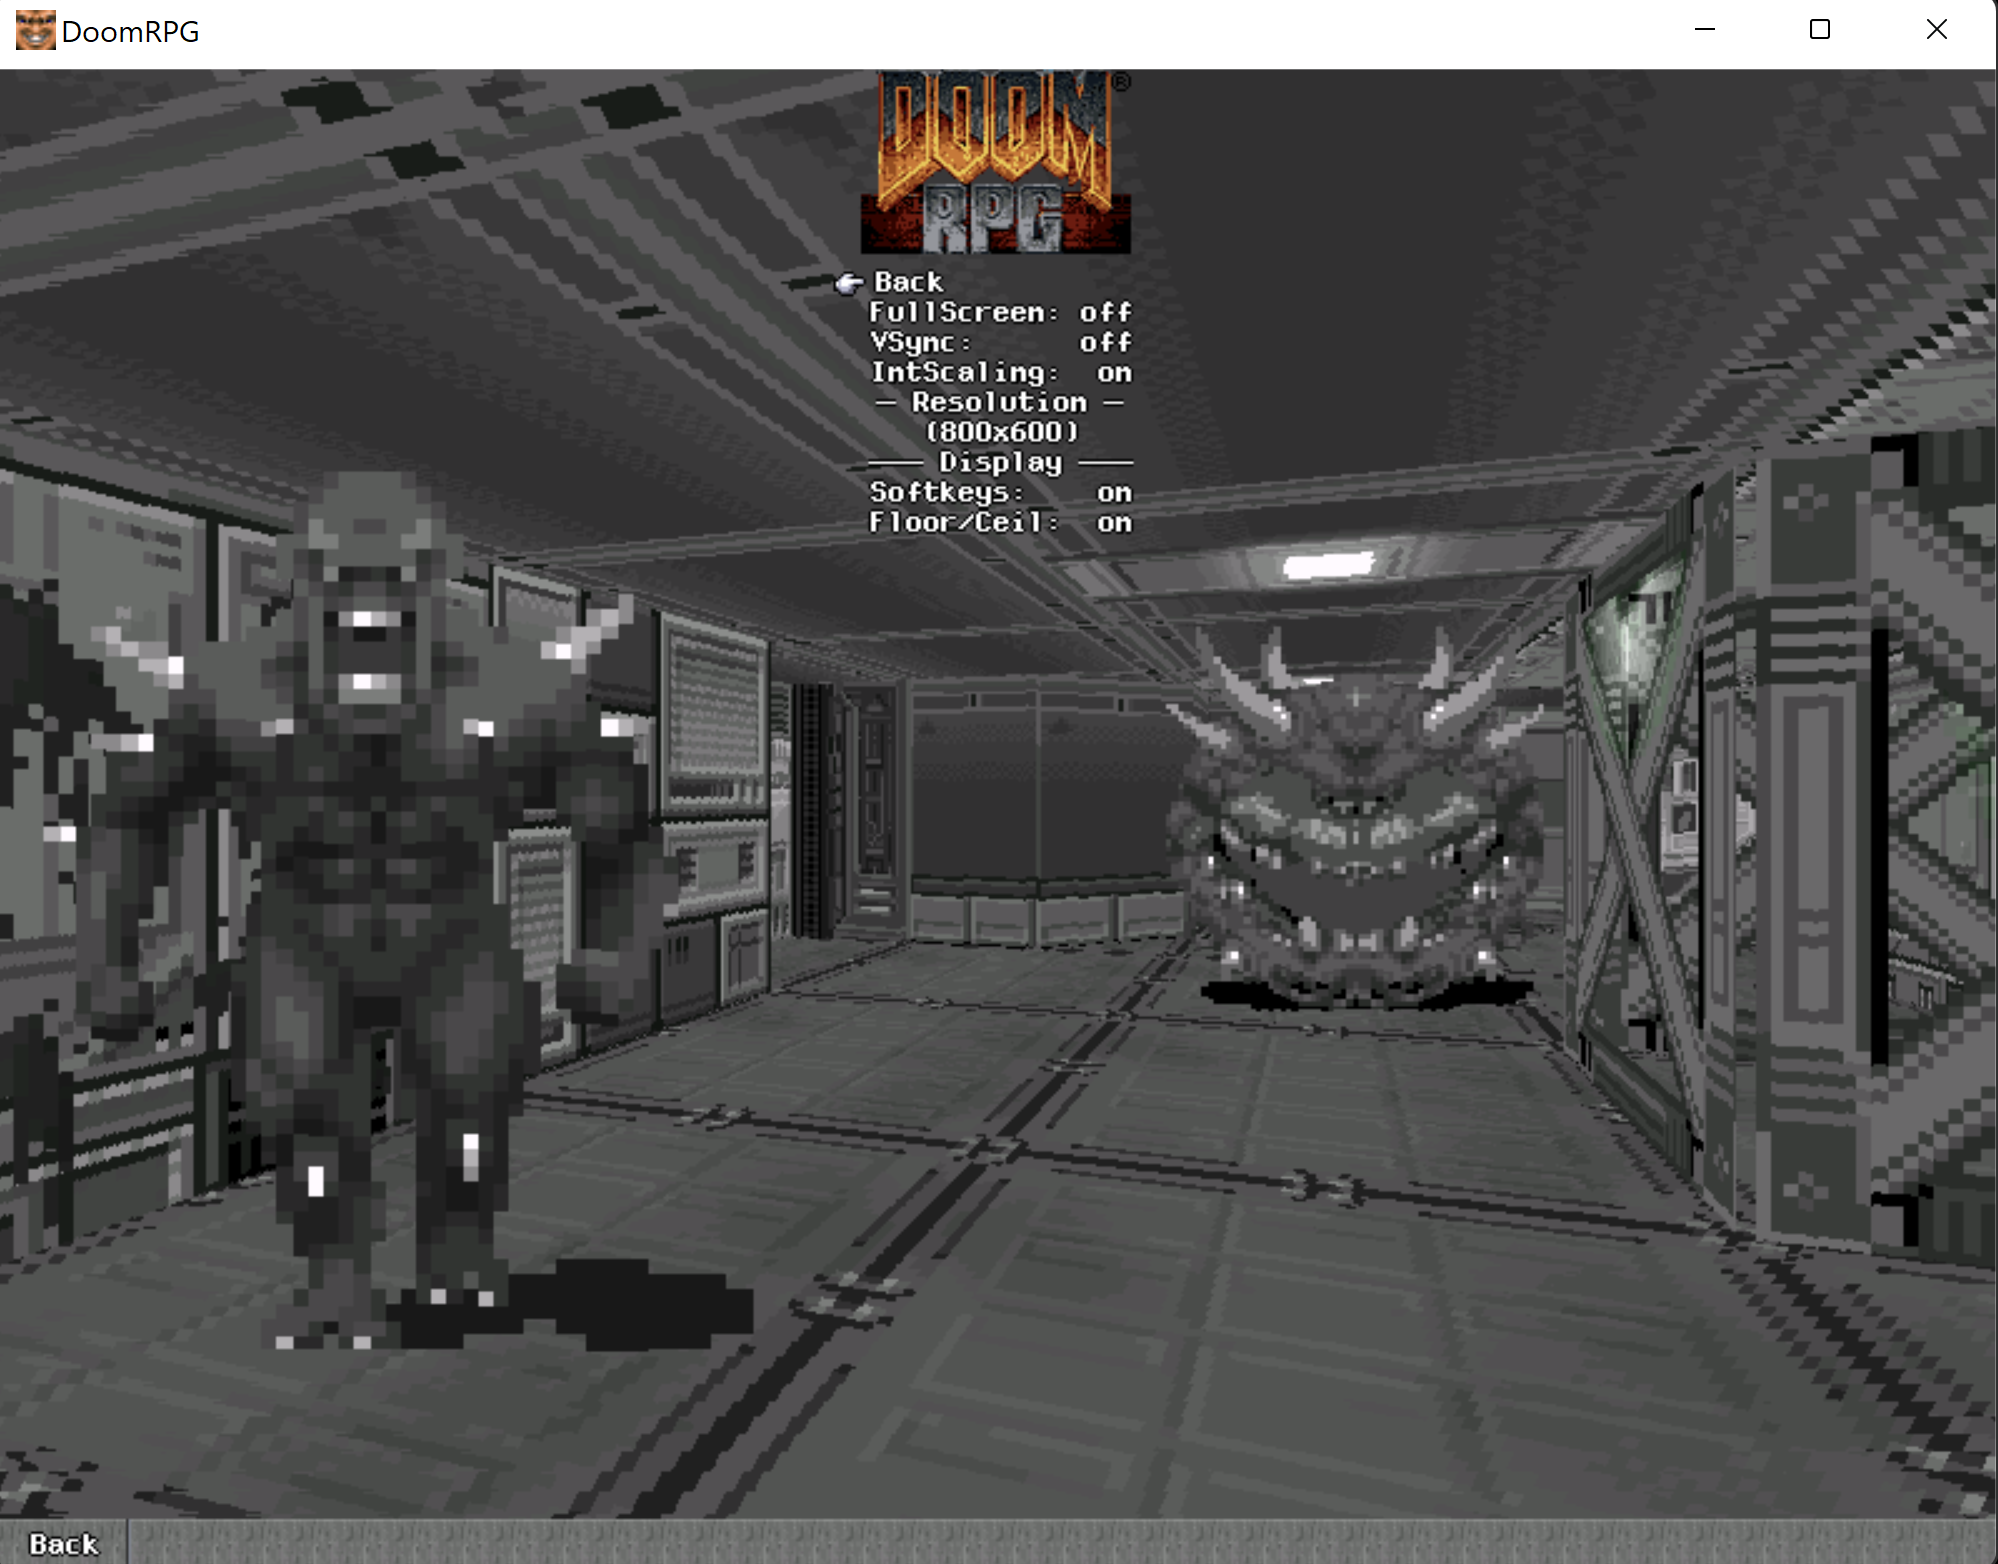 Thanks to fans, the weirdest official Doom game is now playable on Windows